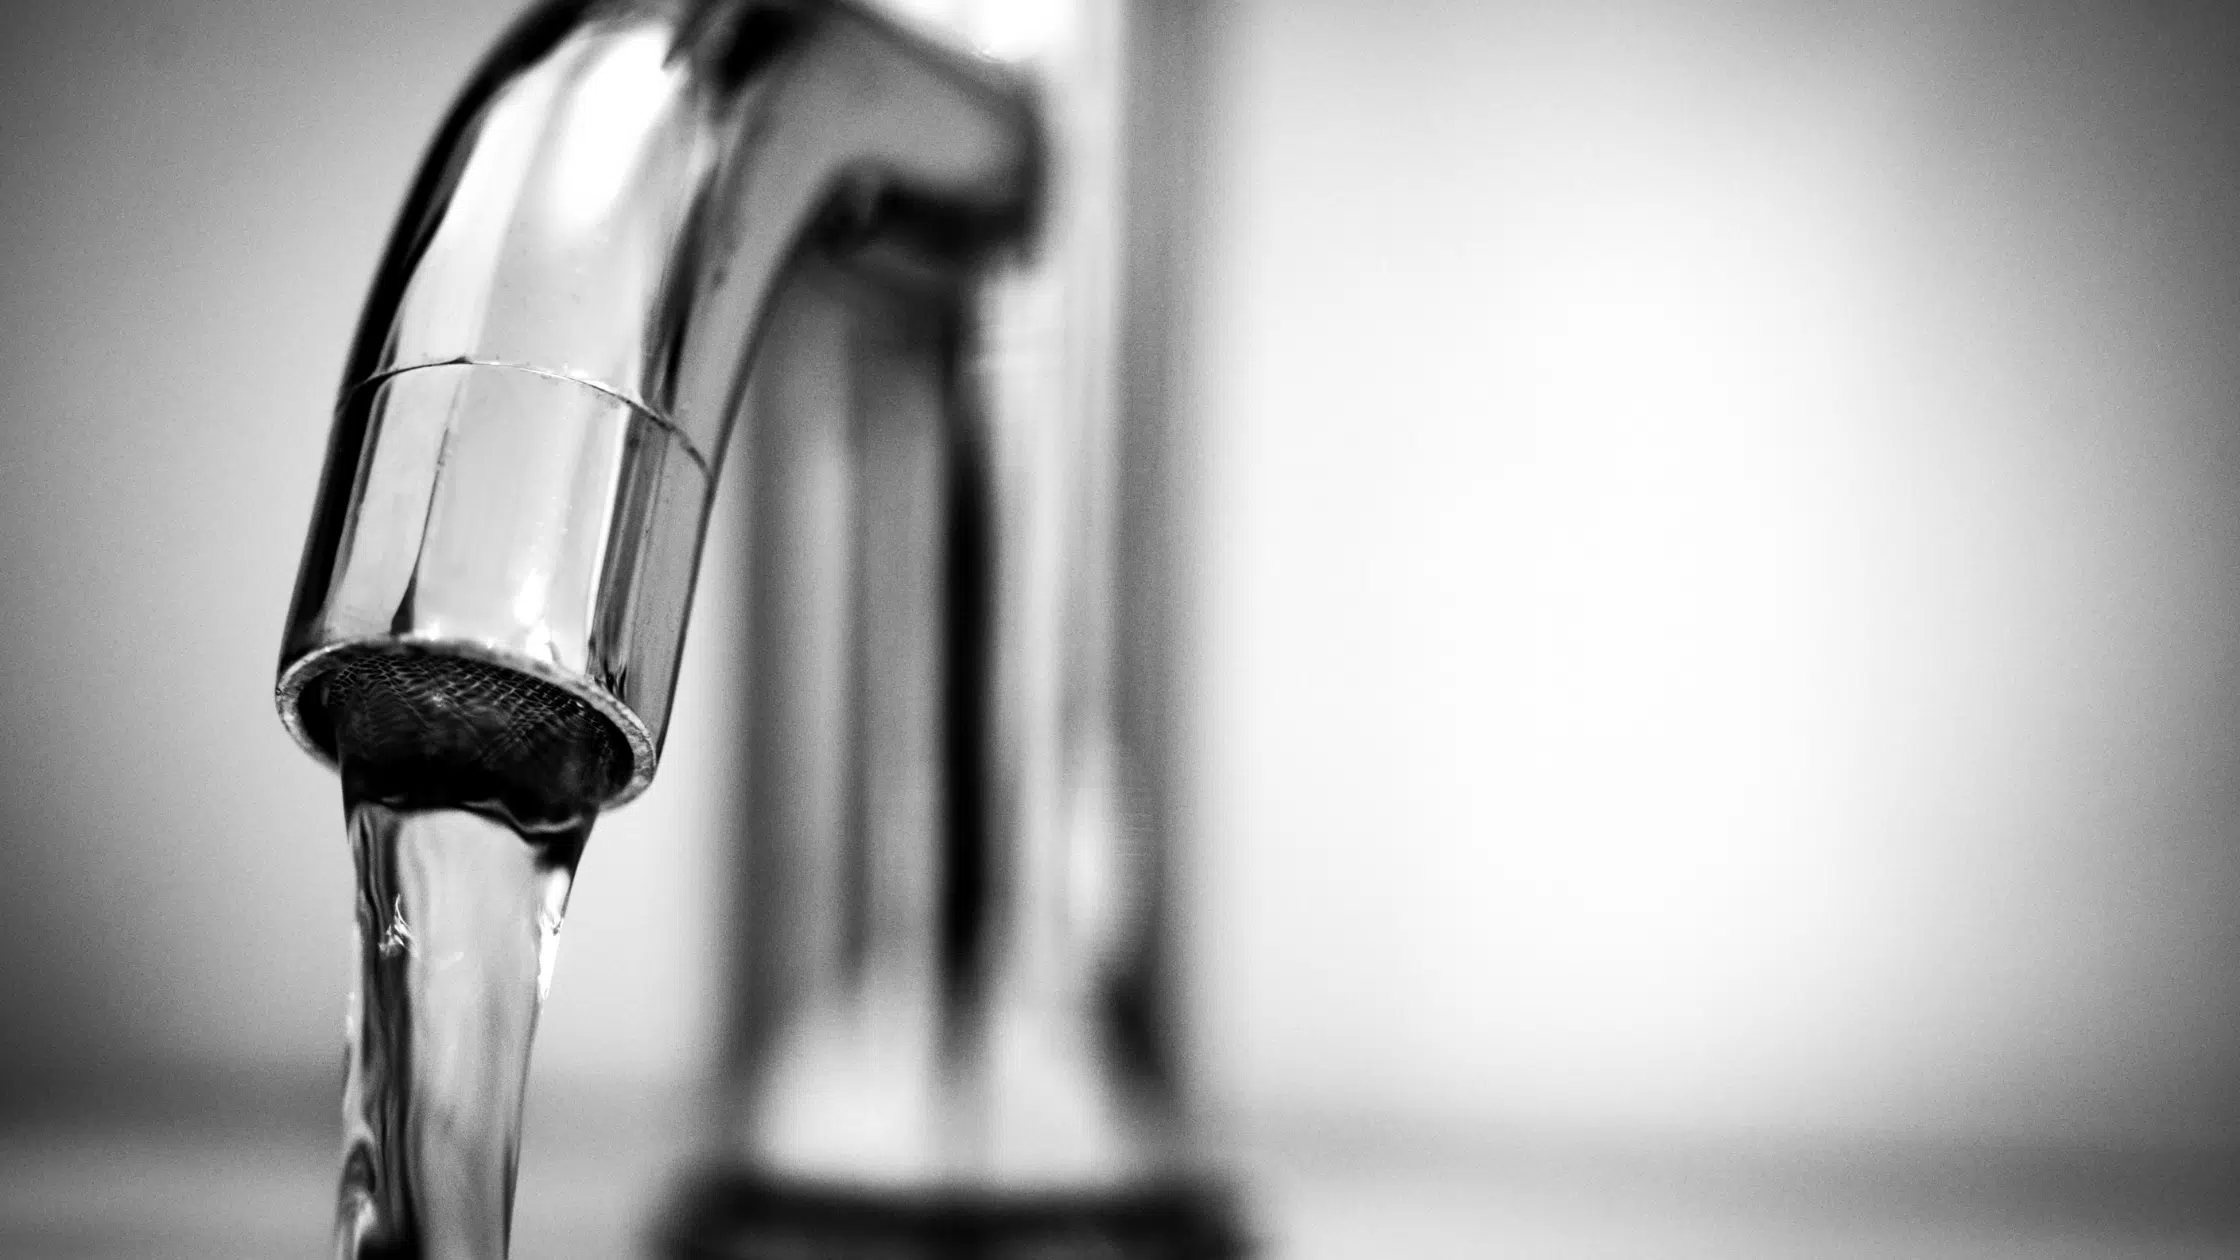 Town of Minto Issuing Precautionary Boil Water Advisory Starting May 6th